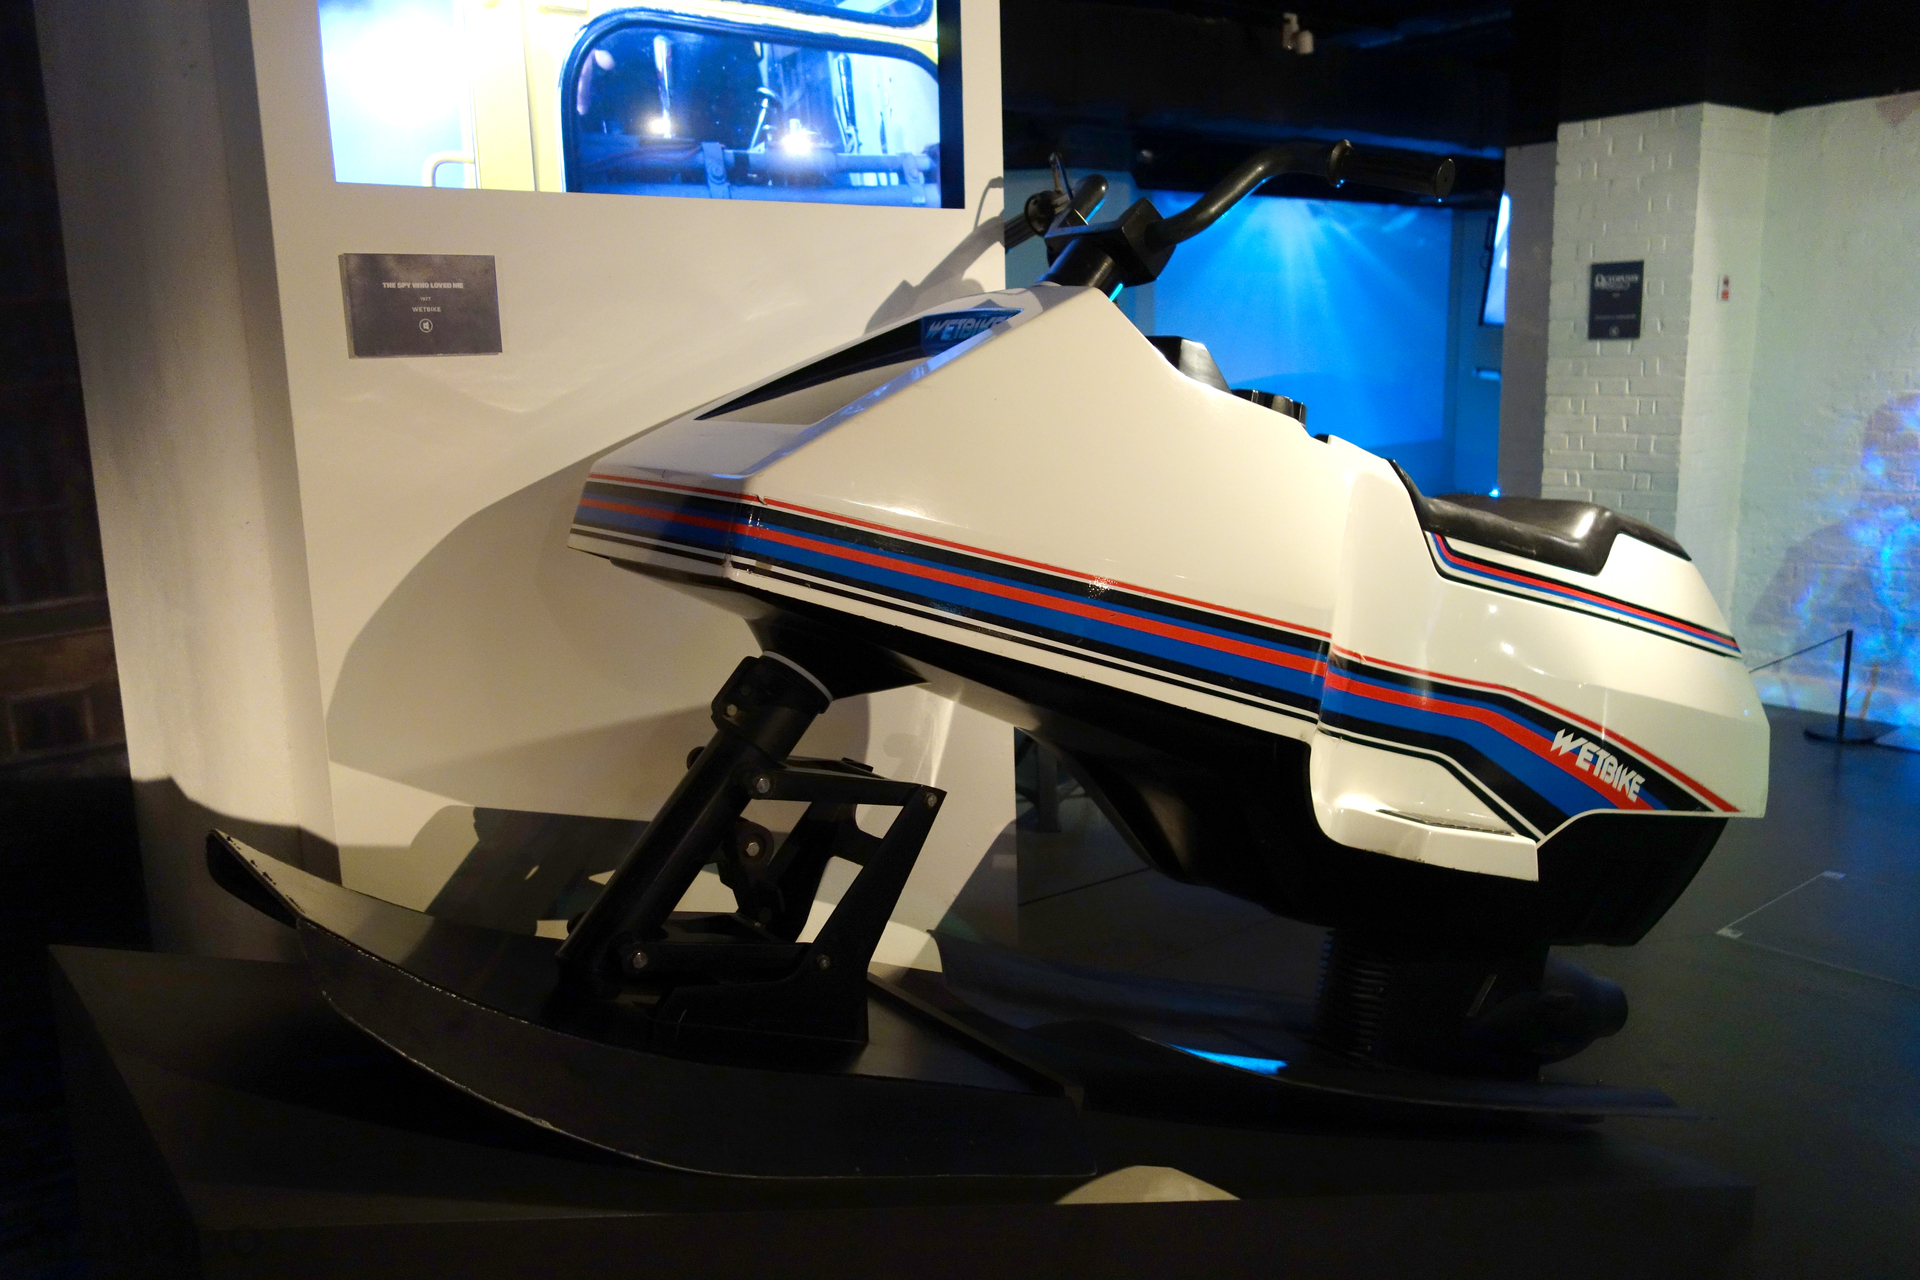 My Afternoon With James Bond’s Amazing Spy Vehicles